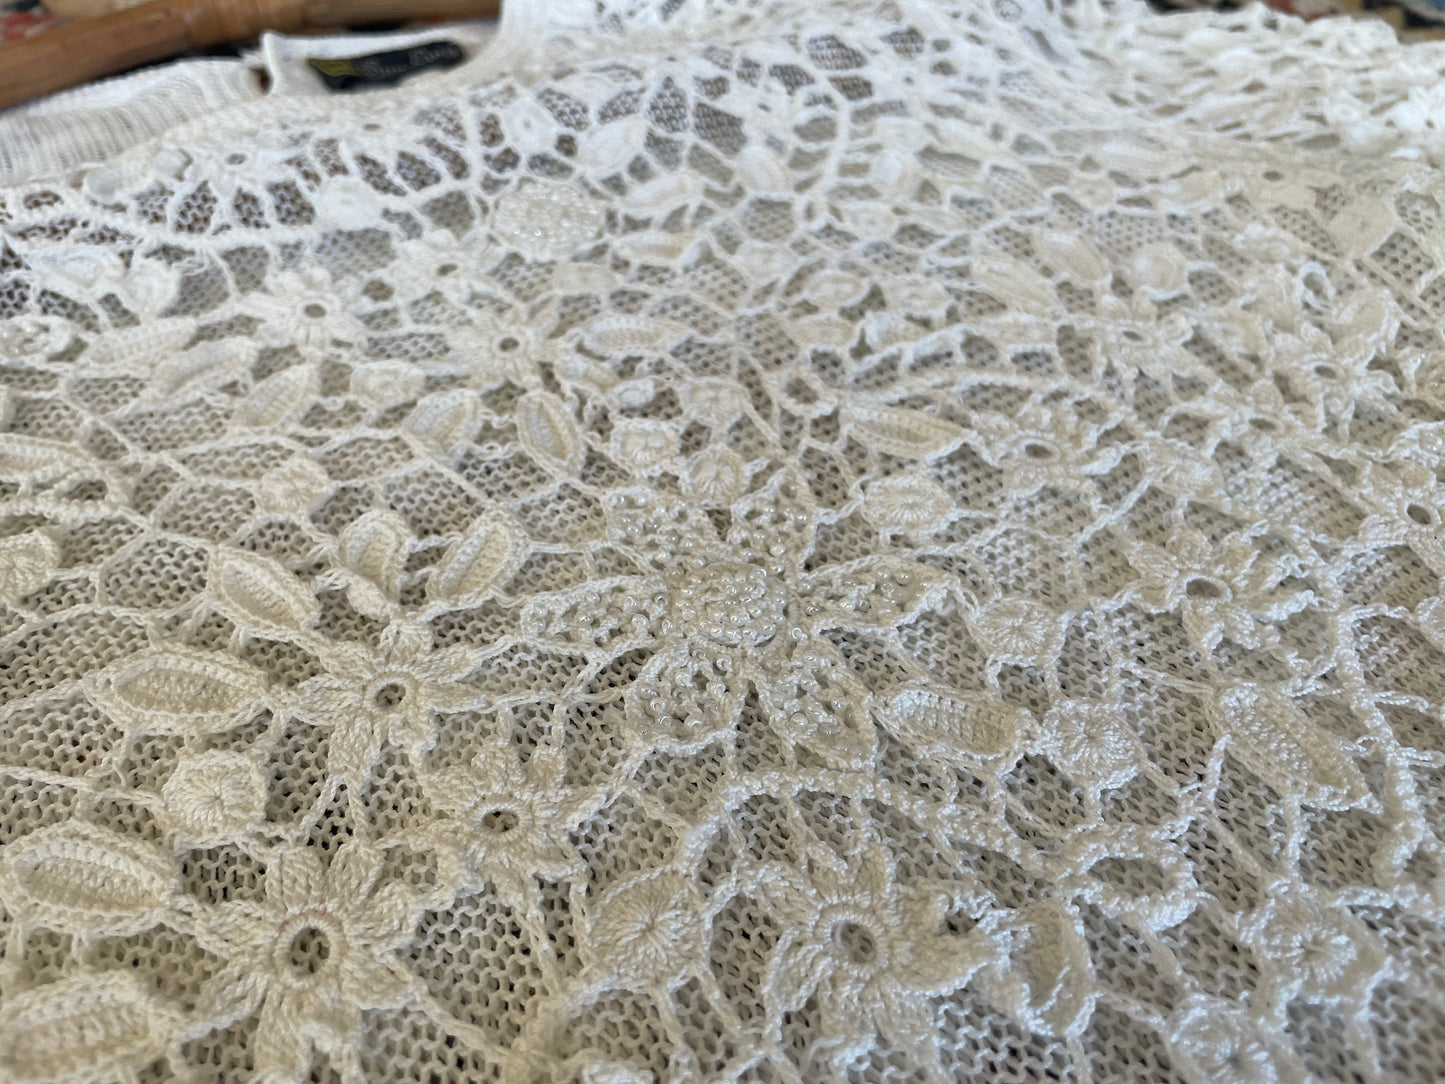 Detail photo of the white beaded shirt, showing the flower crochet pattern